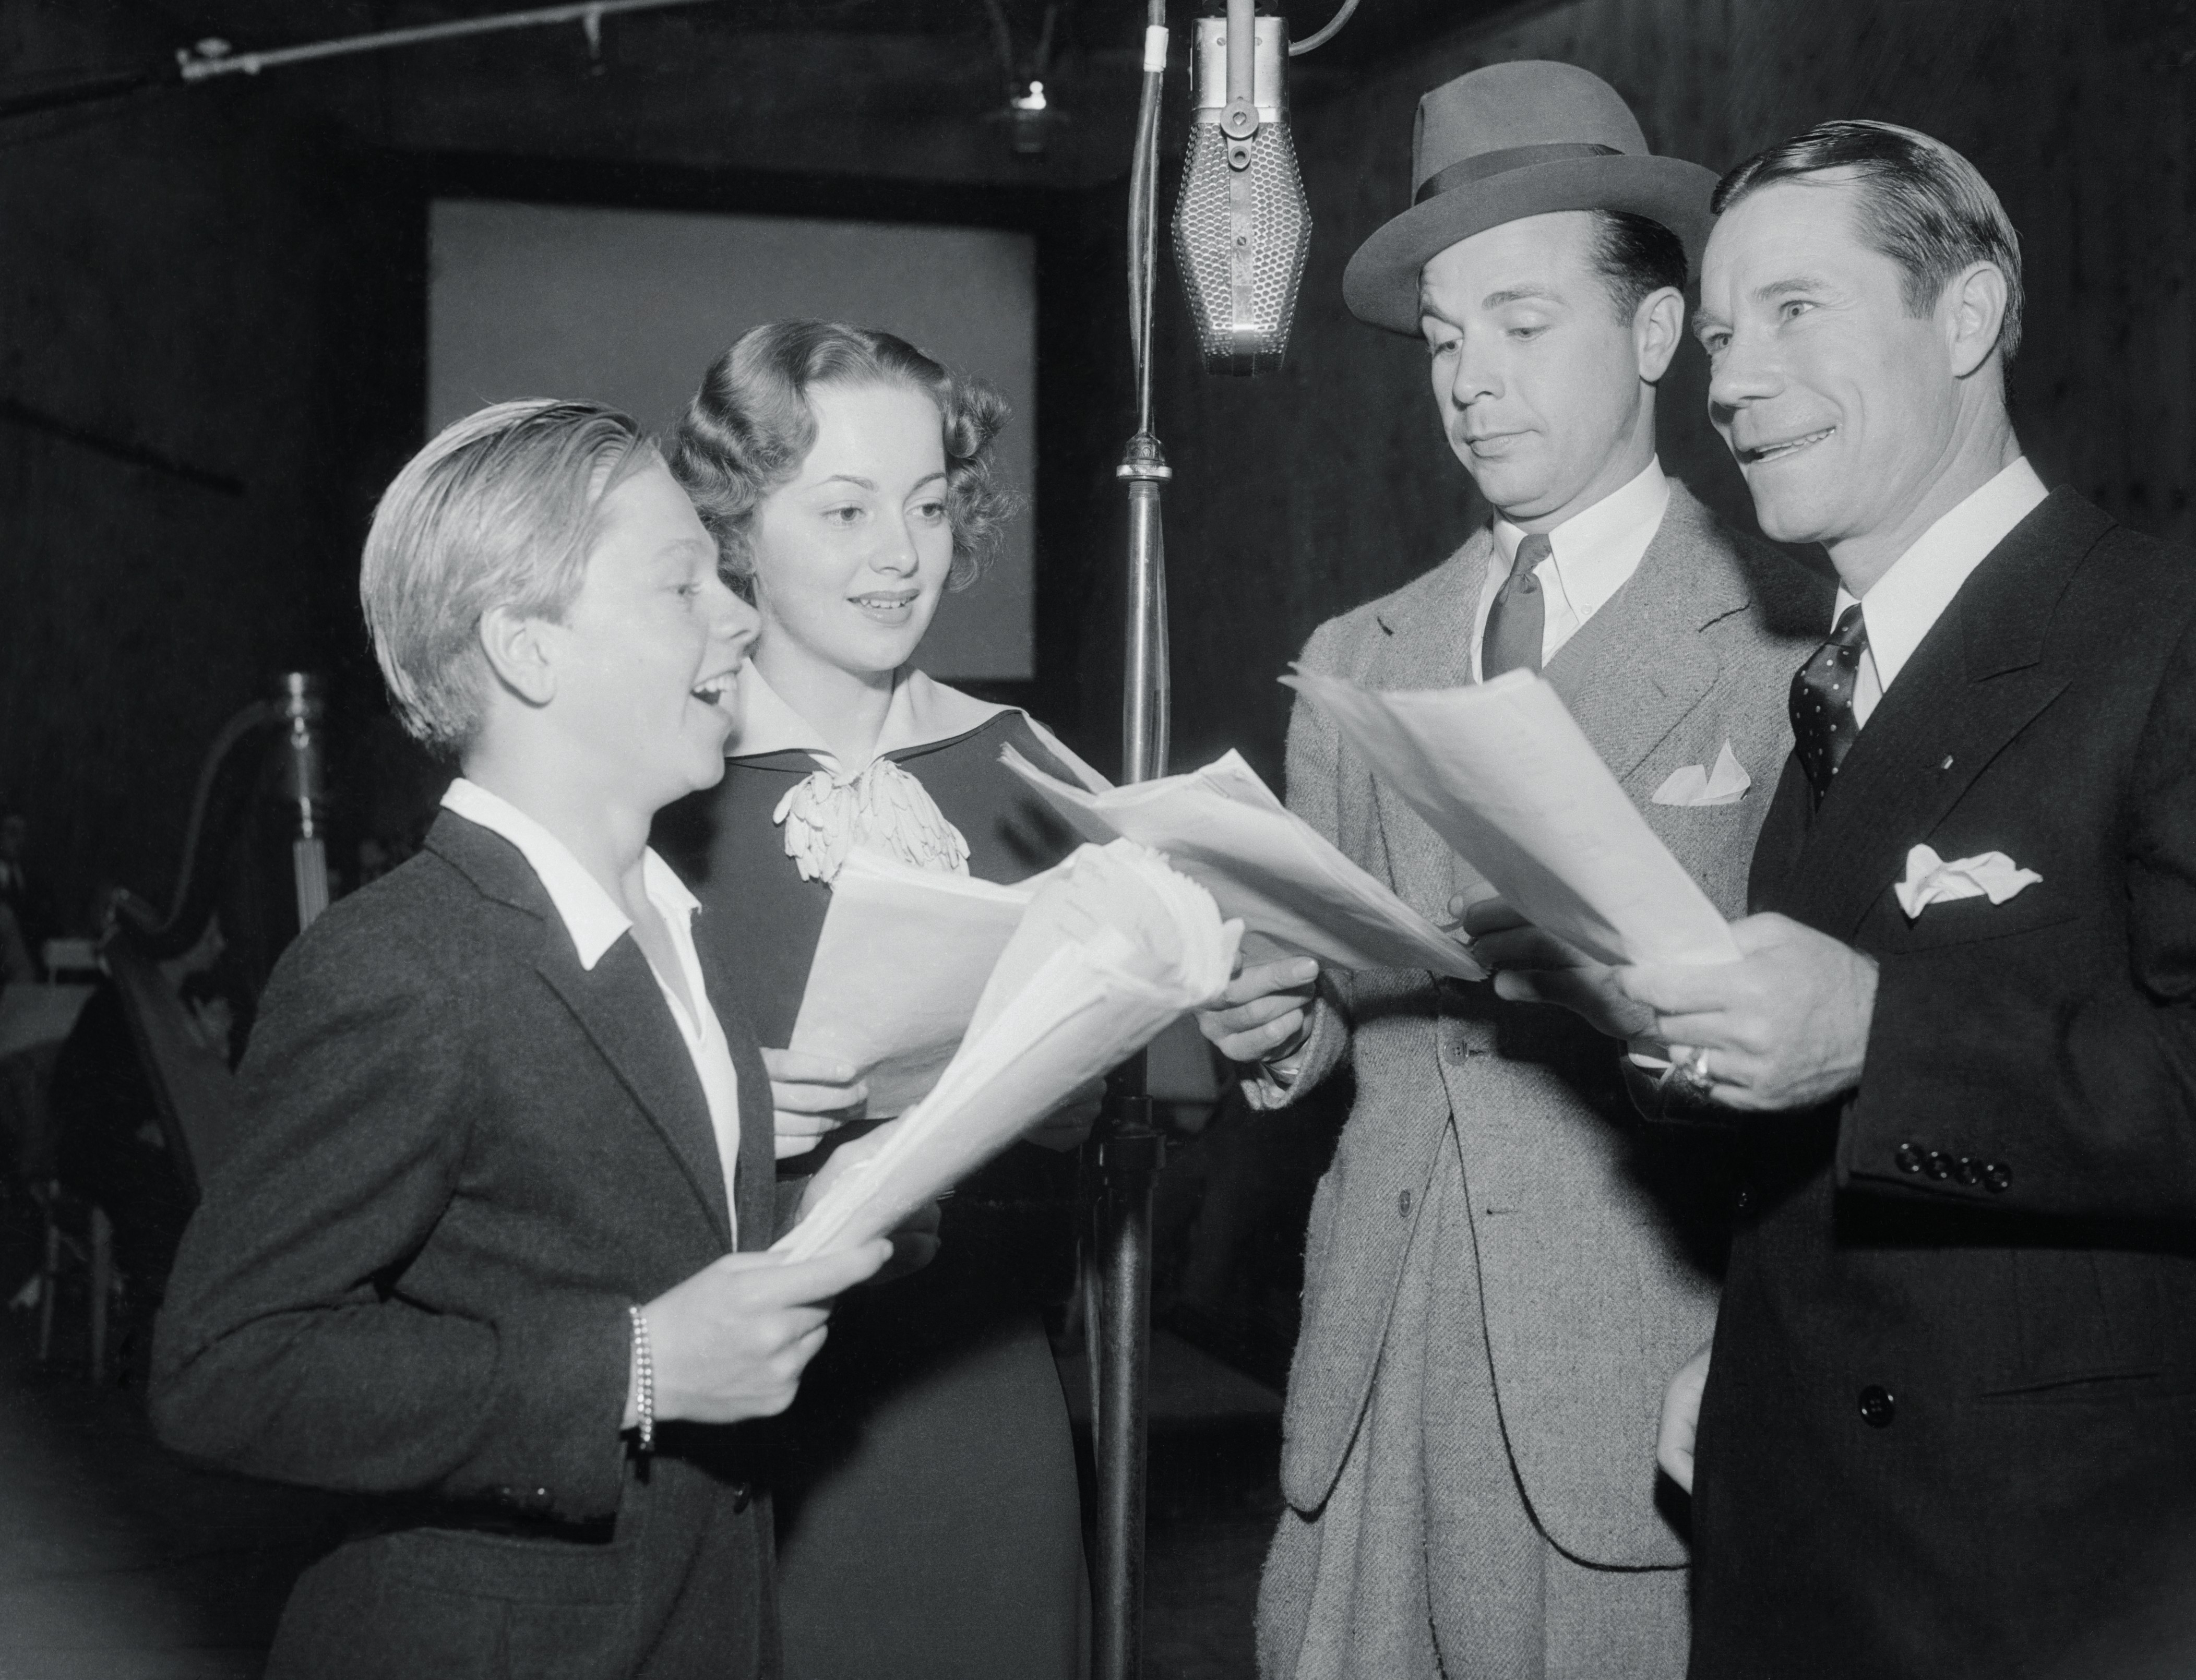 From left: Mickey Rooney, Olivia De Havilland, Dick Powell and Joe E. Brown under the microphone at the nation-wide broadcast from Los Angeles of A Midsummer Night's Dream on Oct. 10, 1935, in Los Angeles.